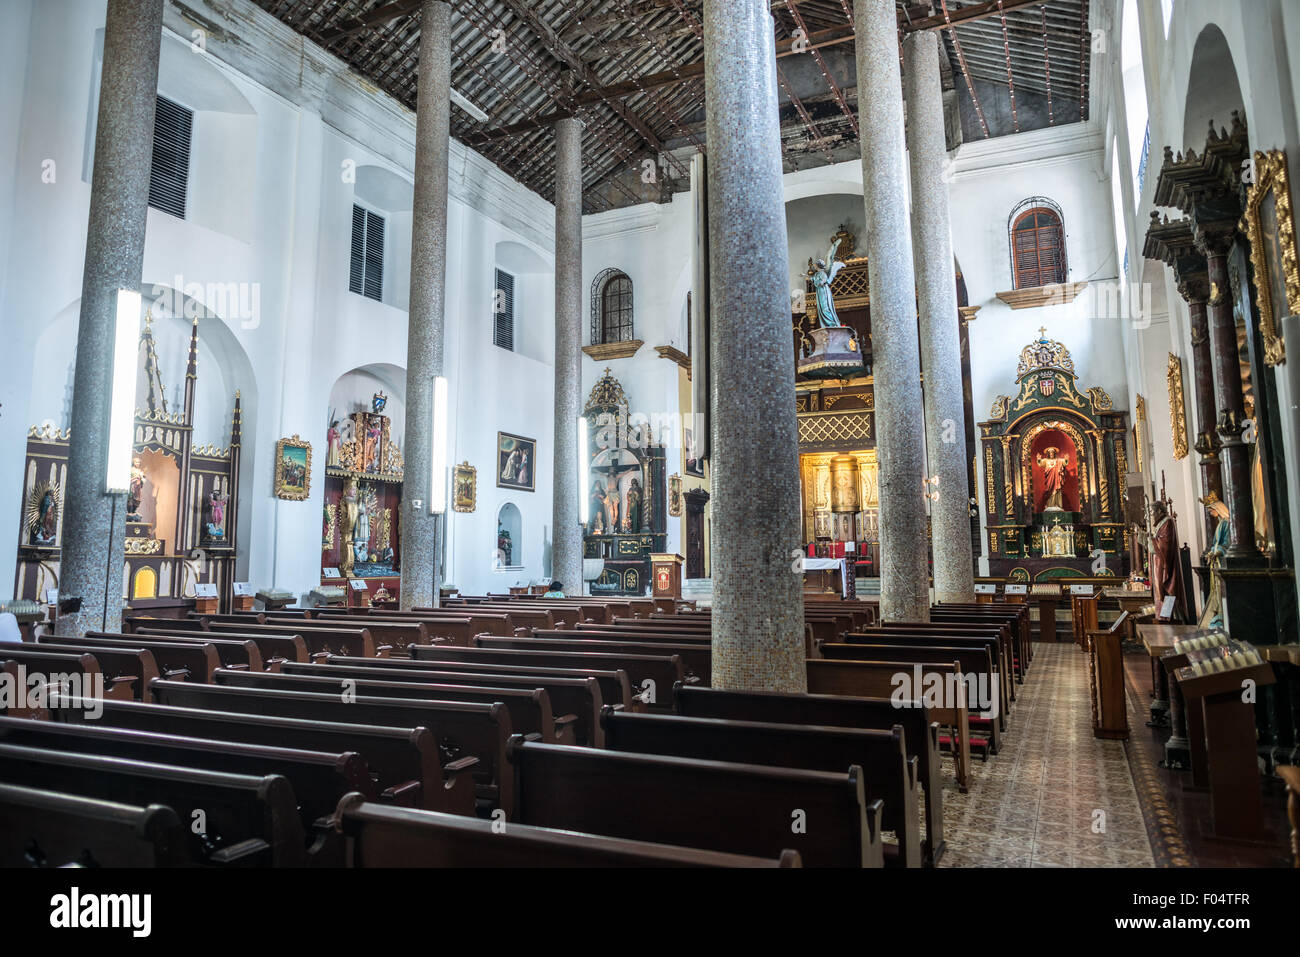 PANAMA CITY, Panama--Dating back to 1680, La Iglesia de la Merced stands in the heart of Casco Viejo, the historic old town of Panama City. Its interior is lavishly decorated with statues and religious art. Stock Photo